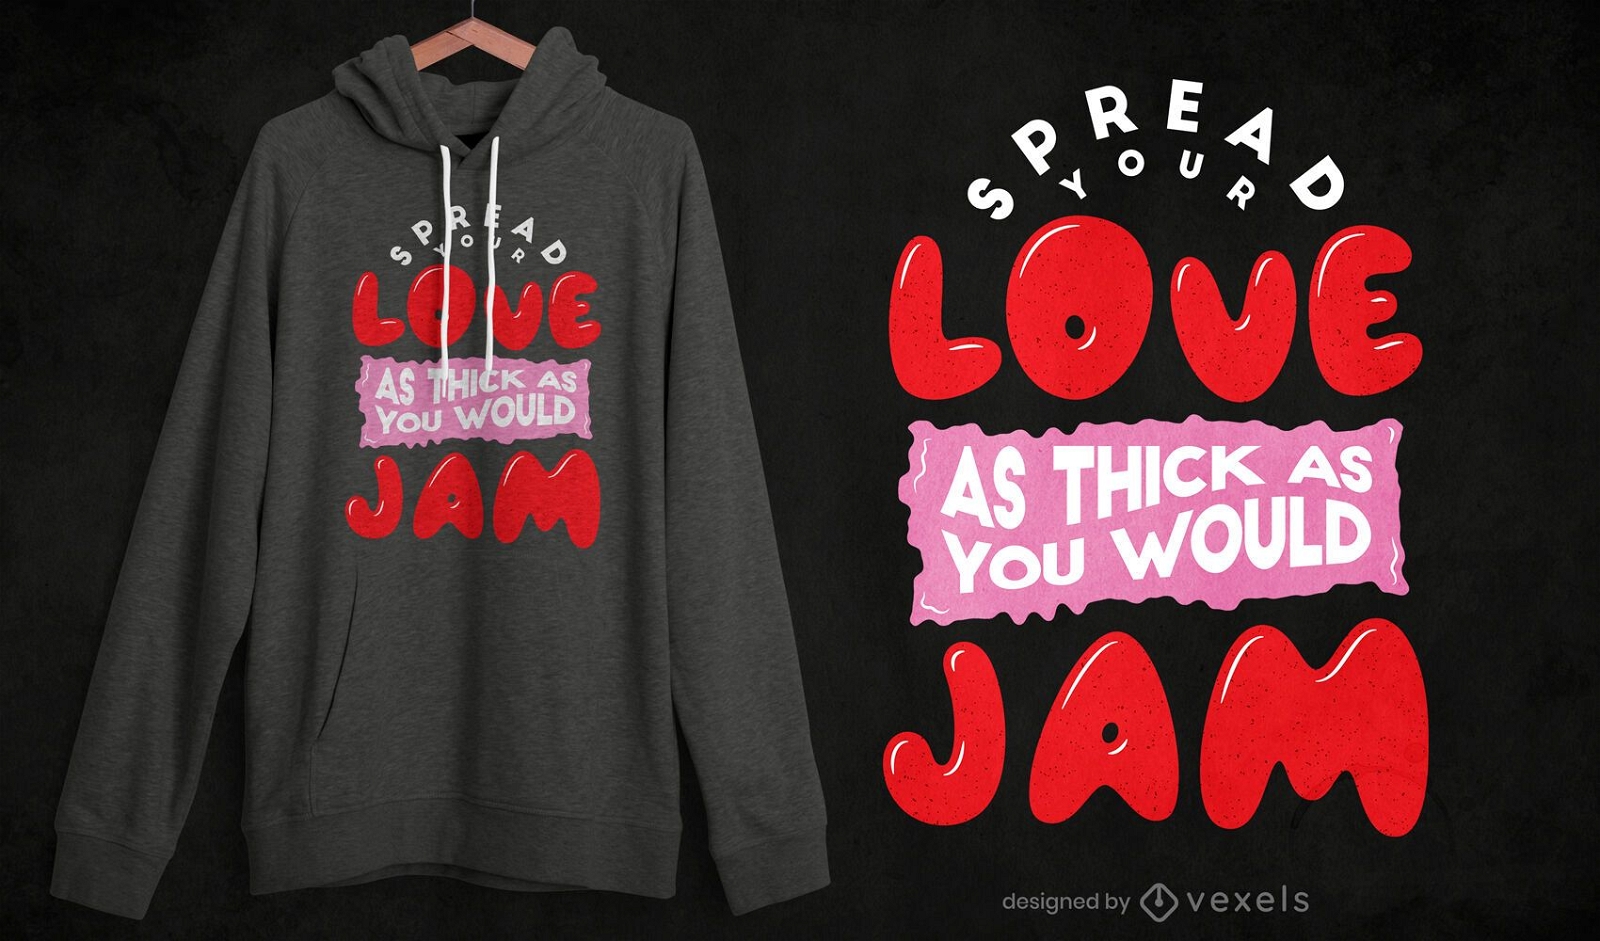 Spread your love t-shirt design